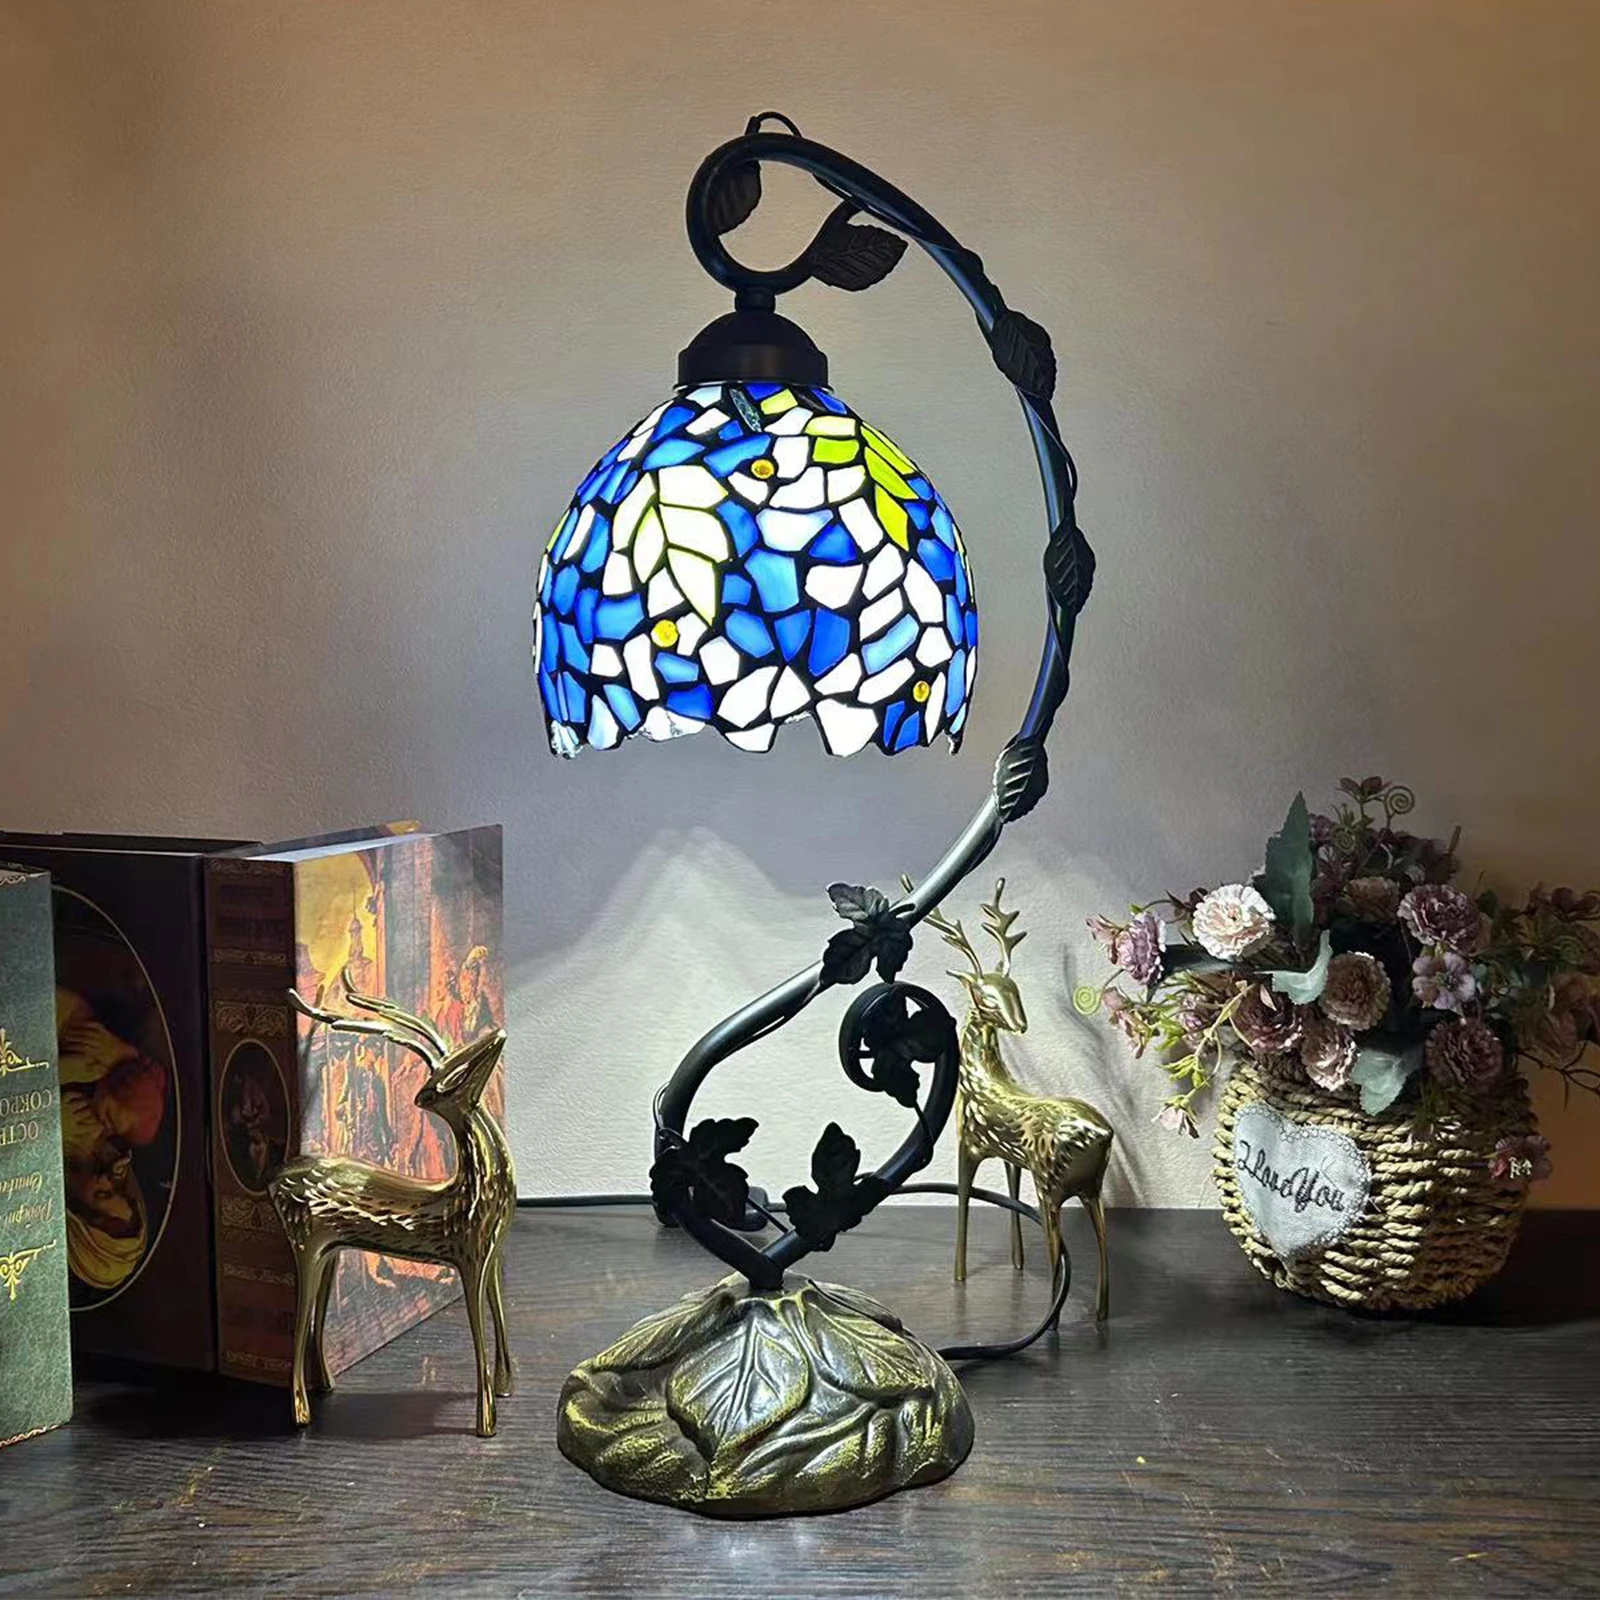 

8 inch 20cm Stained Glass Shade Tiffany Vintage Desk Lamp